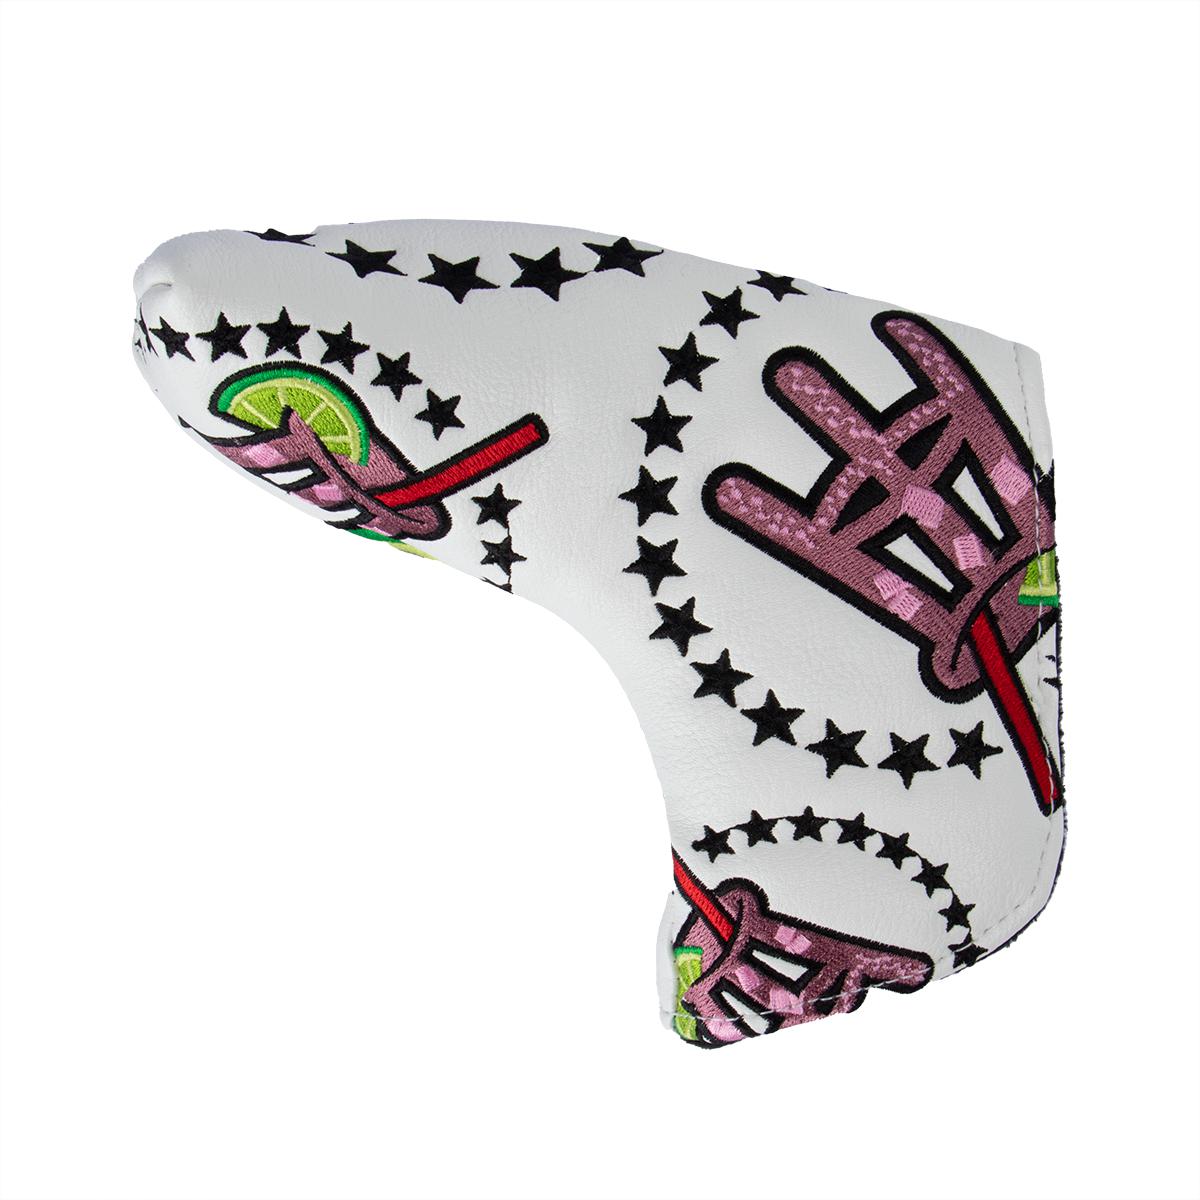 Transfusion Blade Putter Cover-Golf Accessories-Fore Play-White-One Size-Barstool Sports